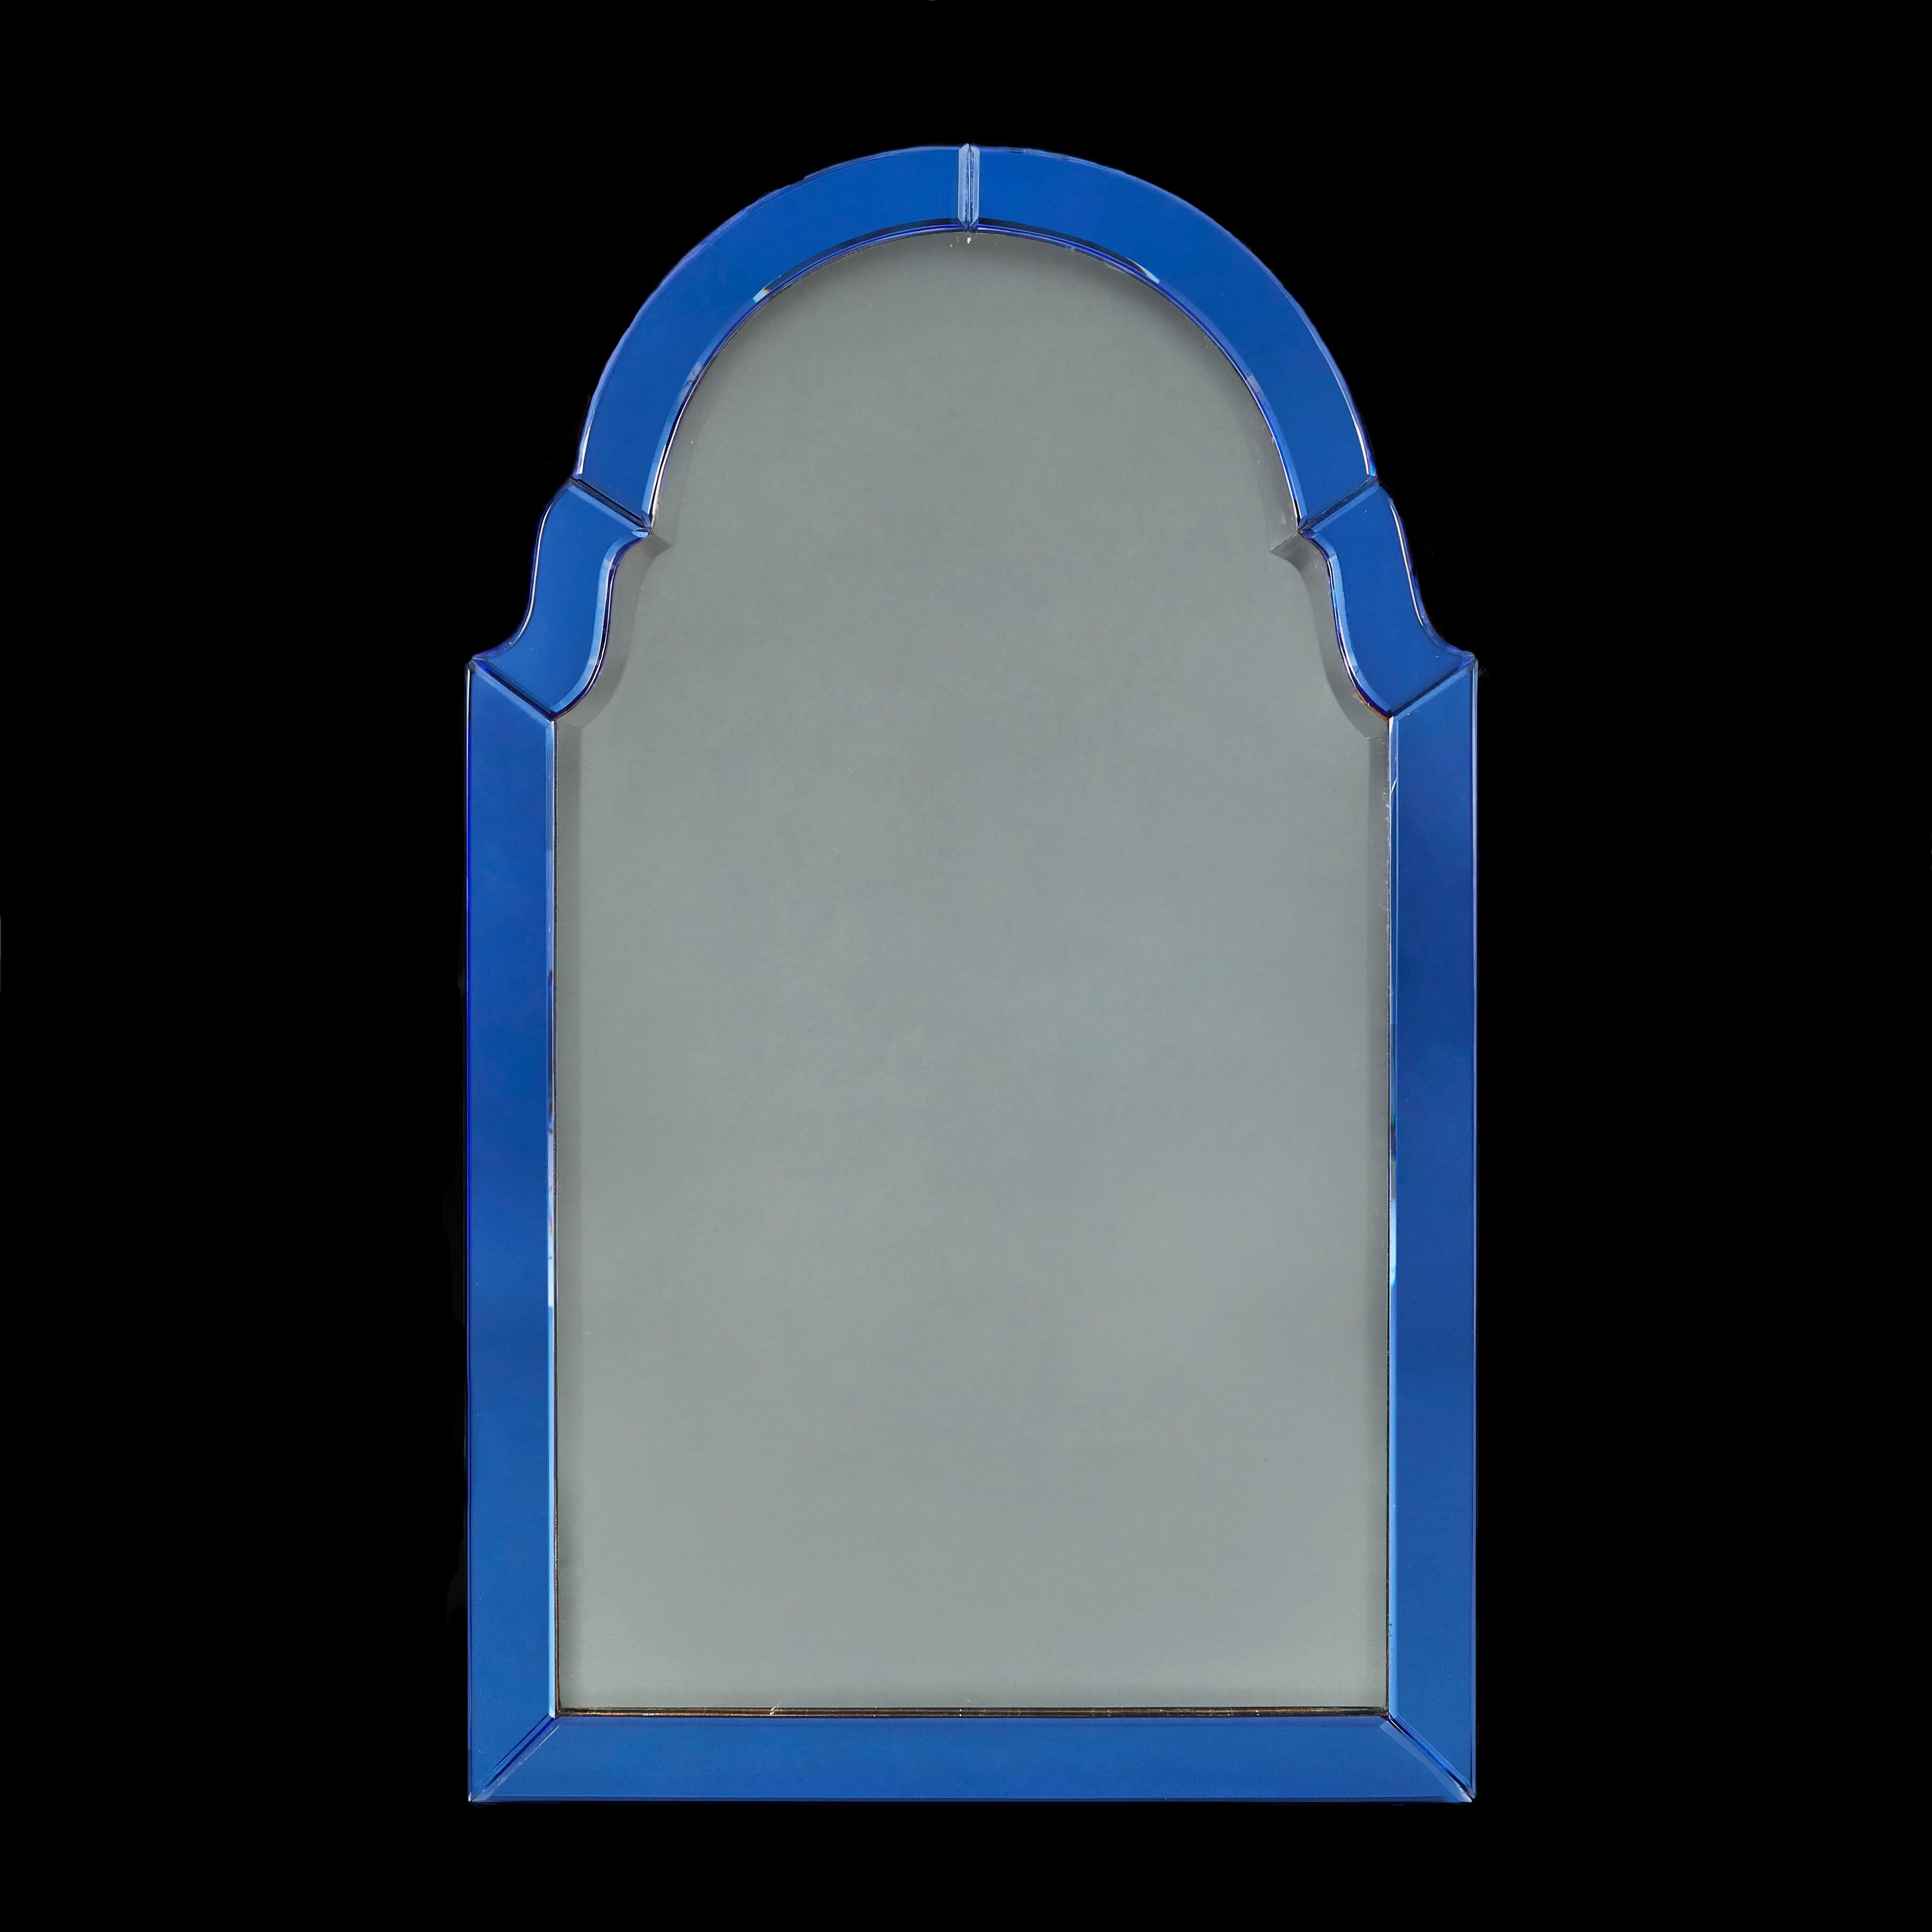 A striking Art Deco mirror with arched pediment, the central shaped and beveled plate framed by blue glass borders with beveled edges.